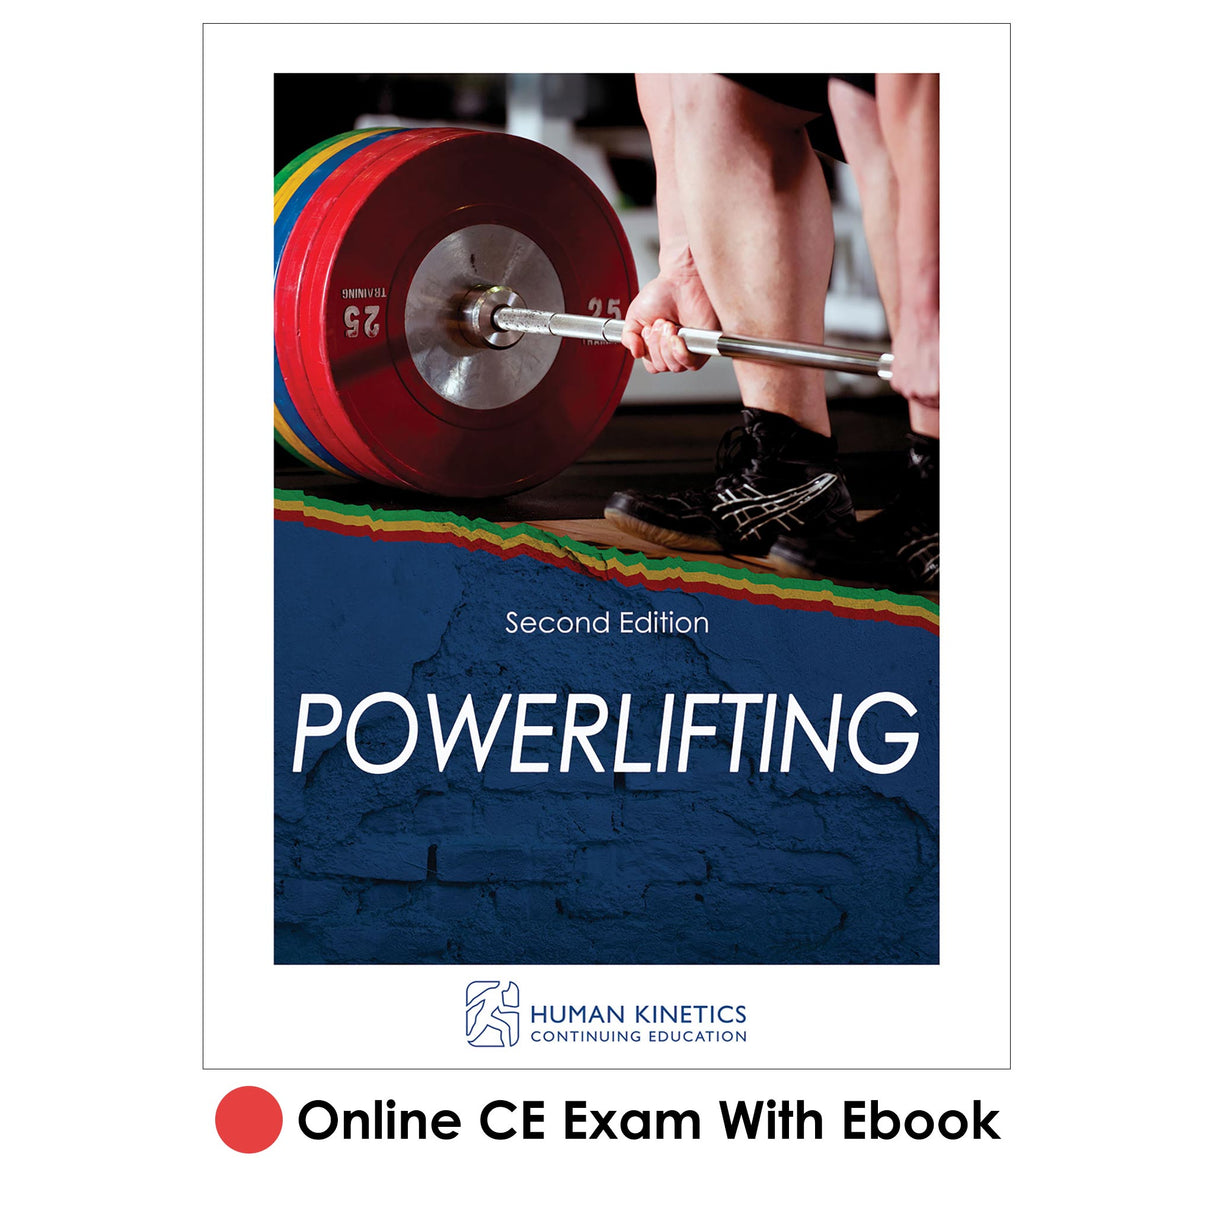 Powerlifting 2nd Edition Online CE Exam With Ebook